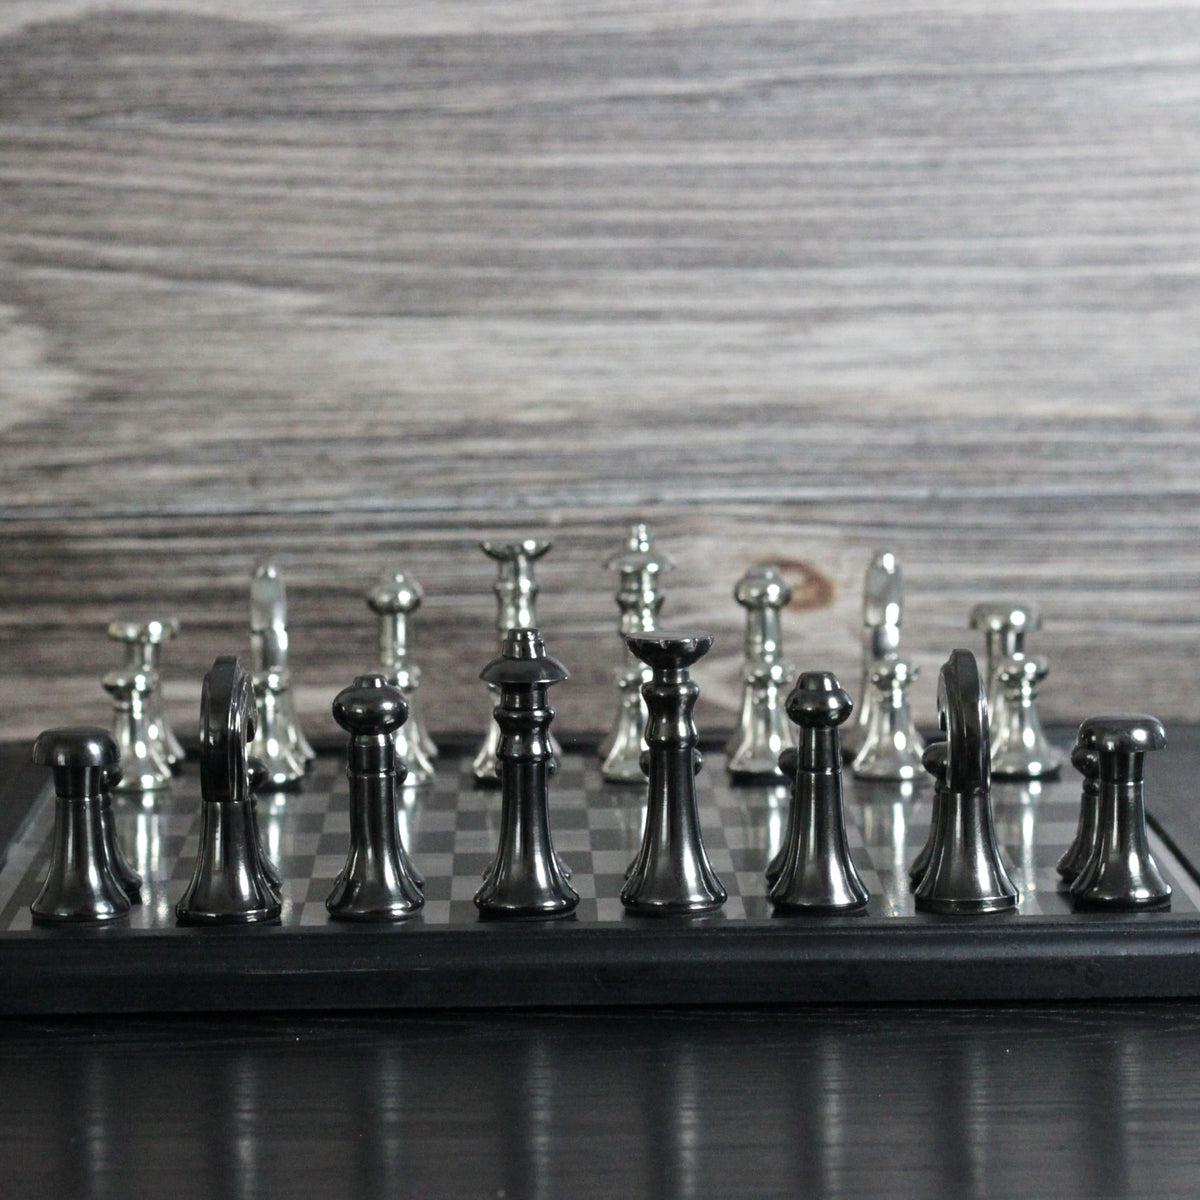 The Modern Defense - Black and Silver Metallic Chess Set - Marble Cultures